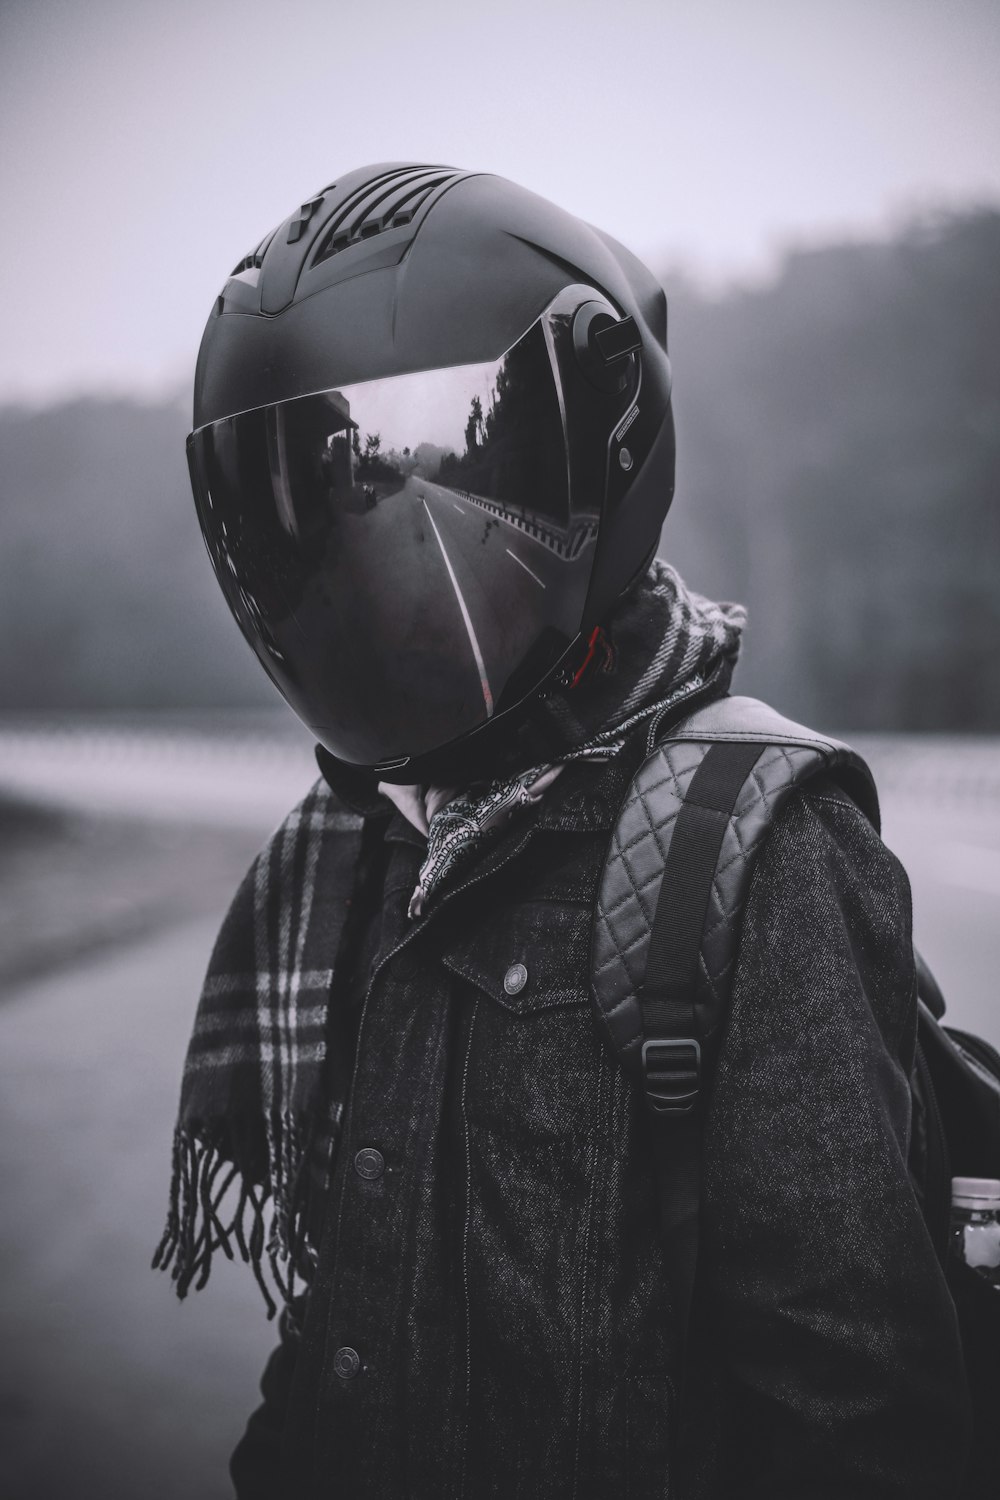 person wearing helmet and backpack in grayscale photo